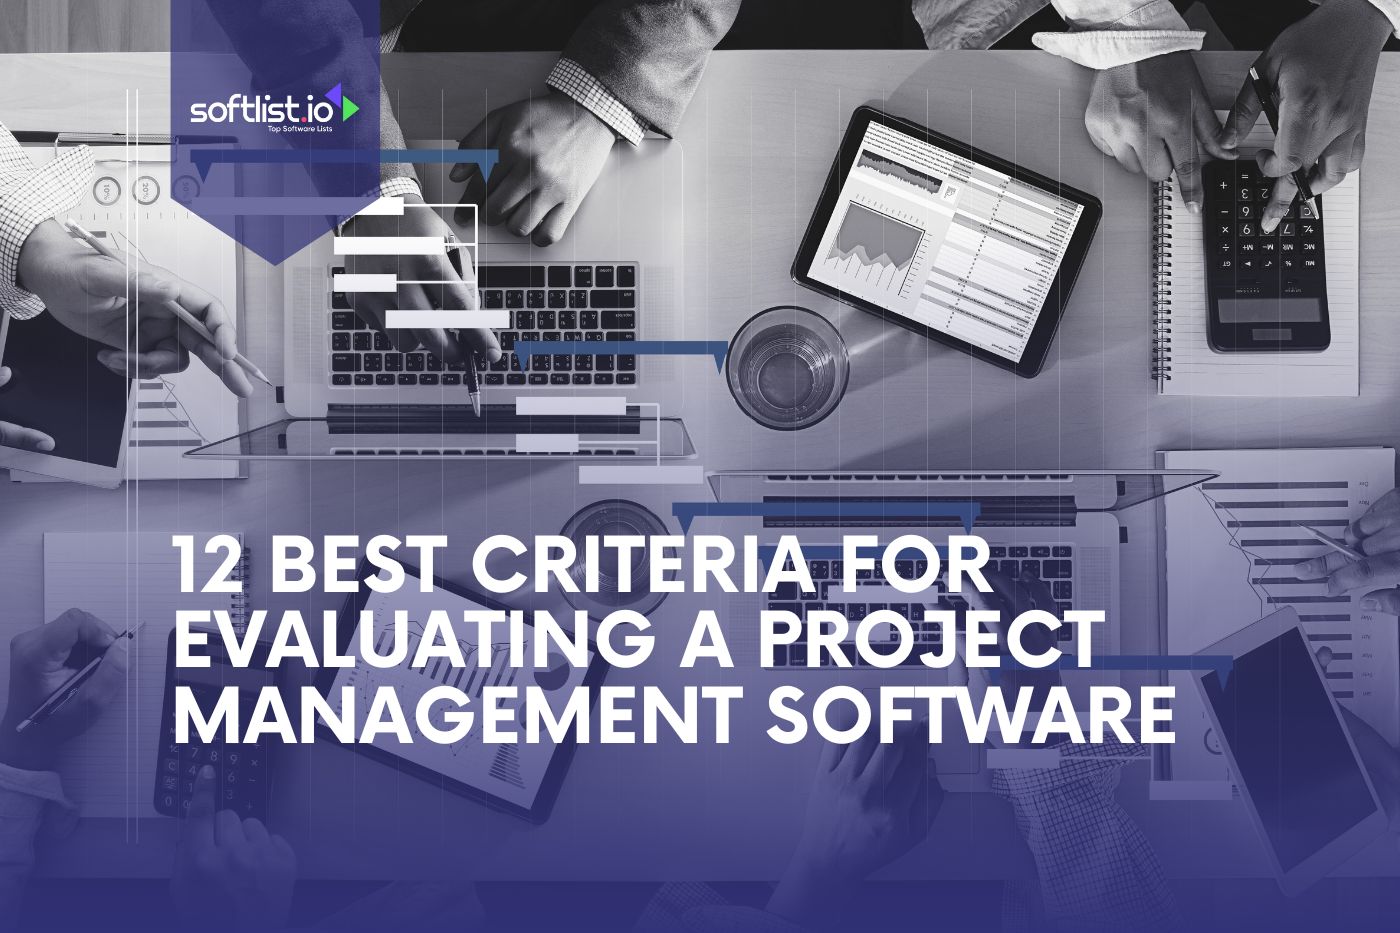 12 Best Criteria for Evaluating A Project Management Software